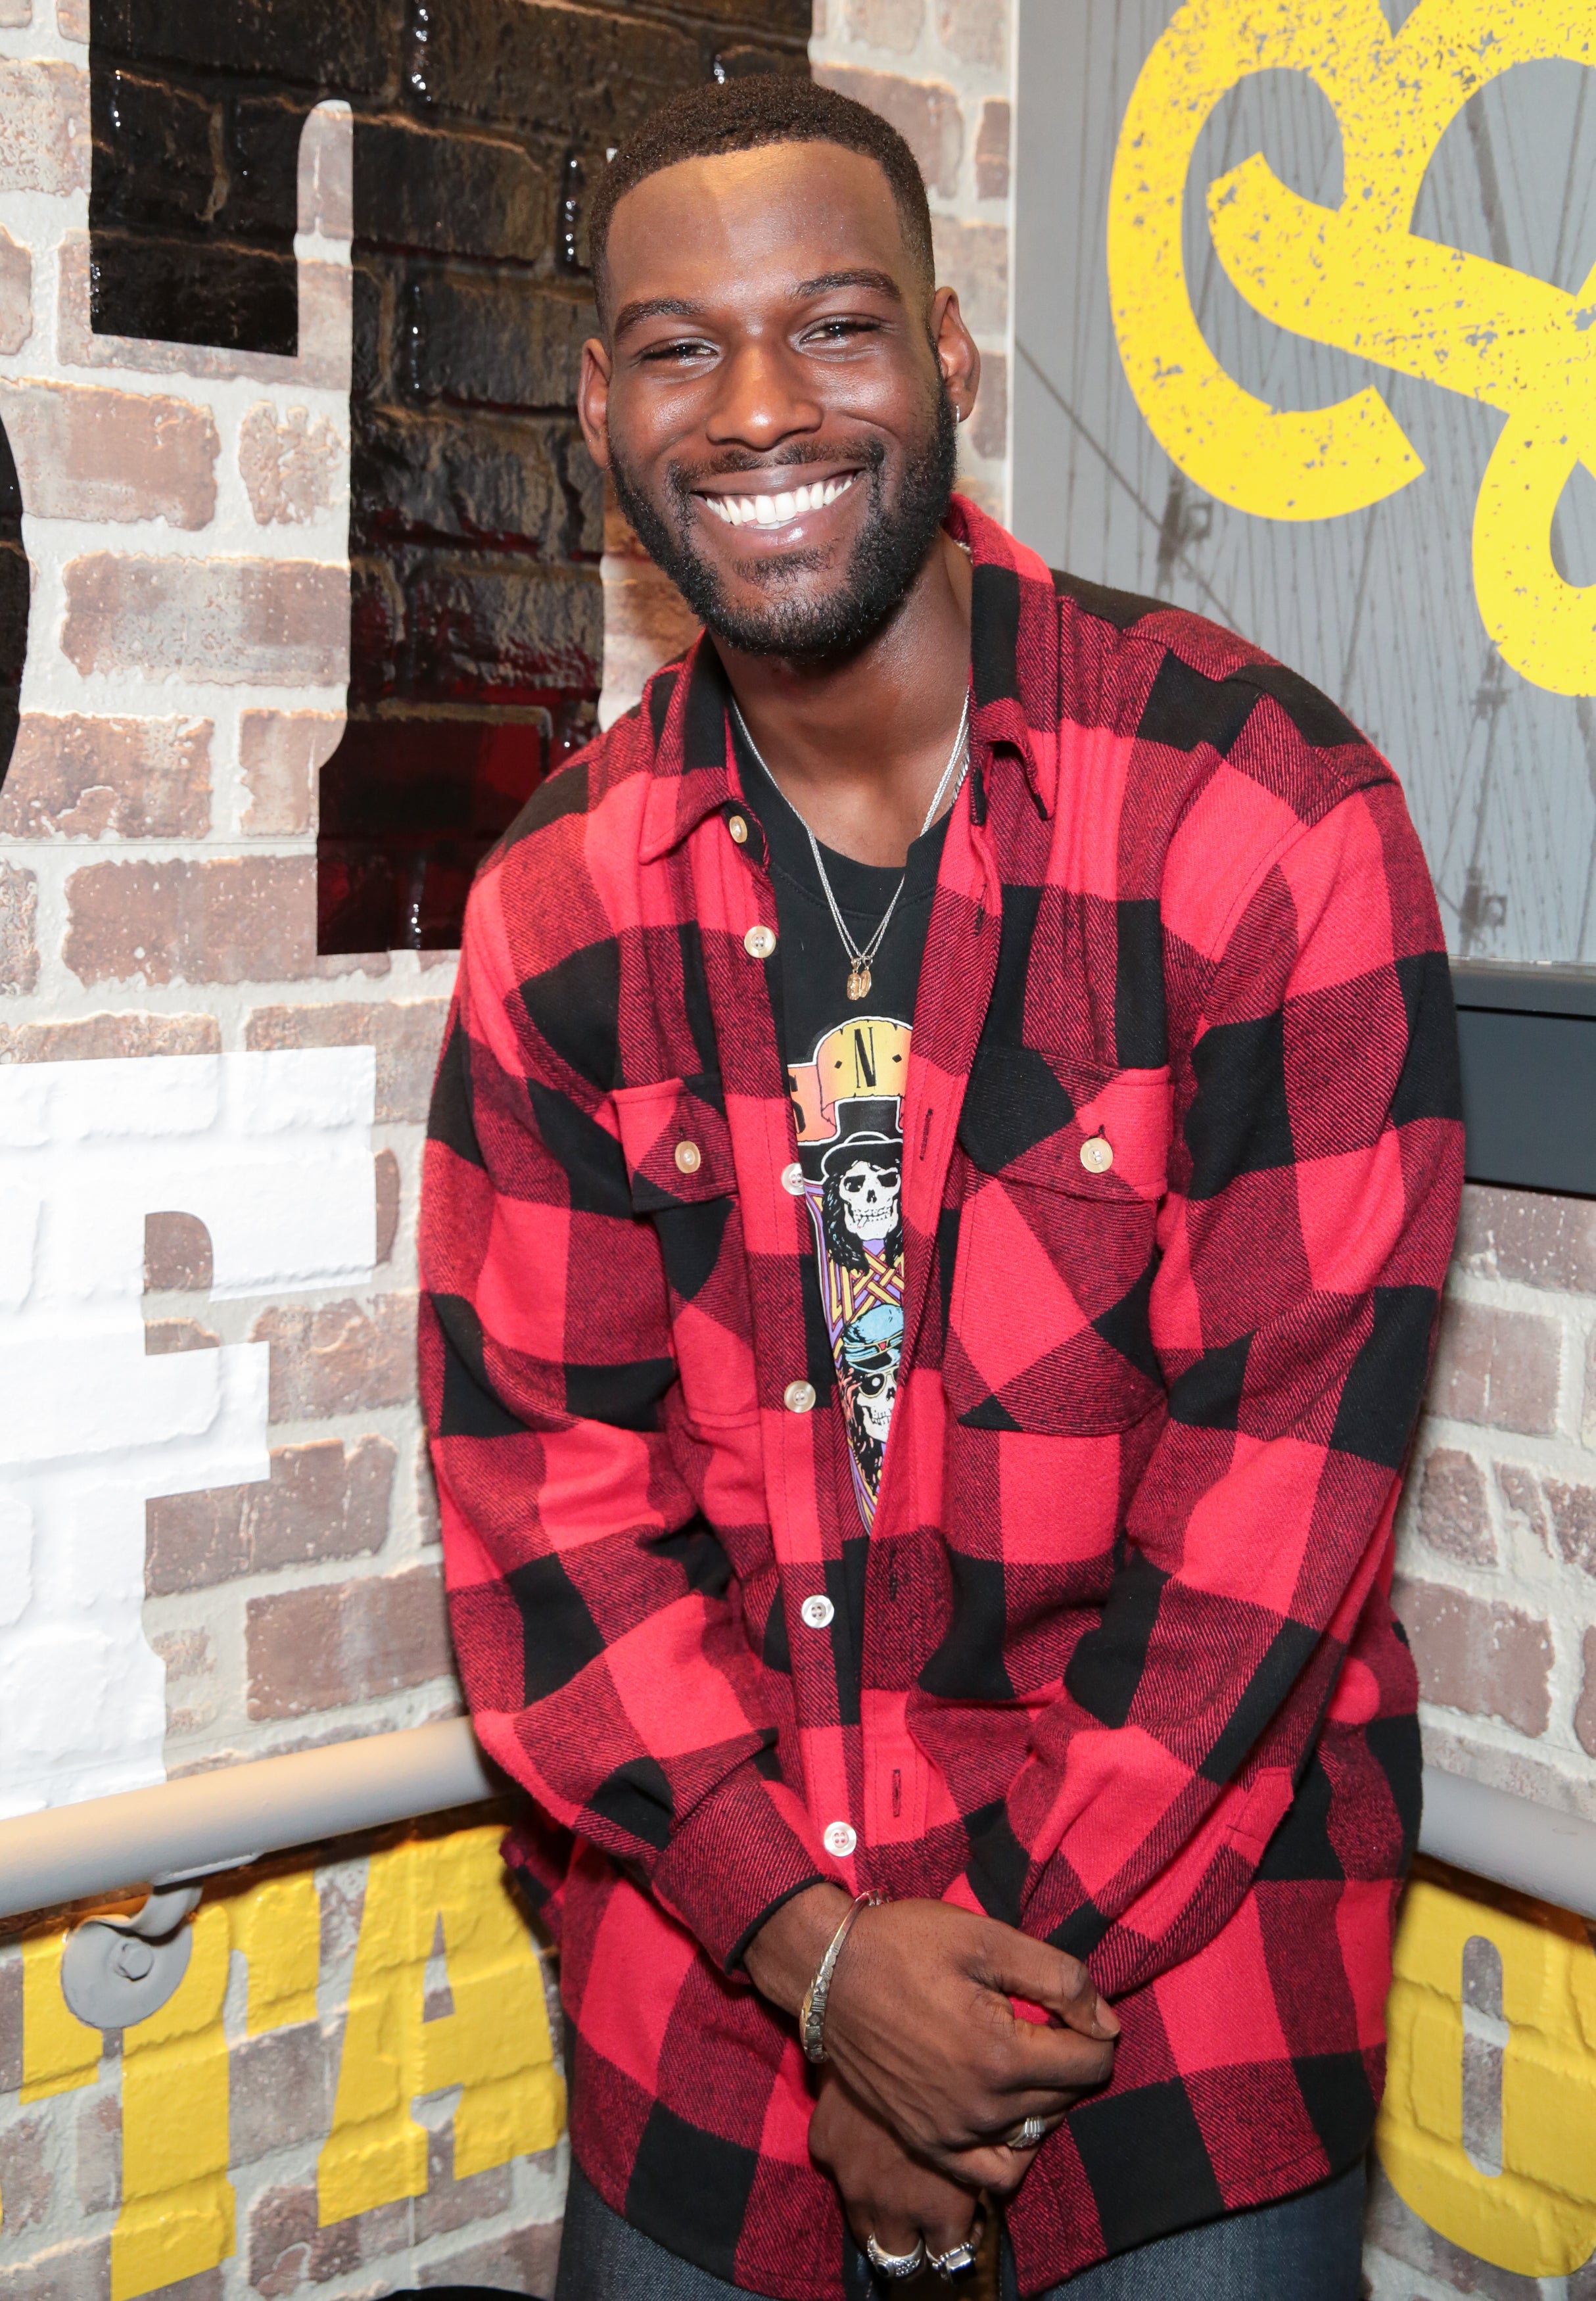 Kofi Siriboe, Solange, Sanaa Lathan and More Celebs Out and About!
